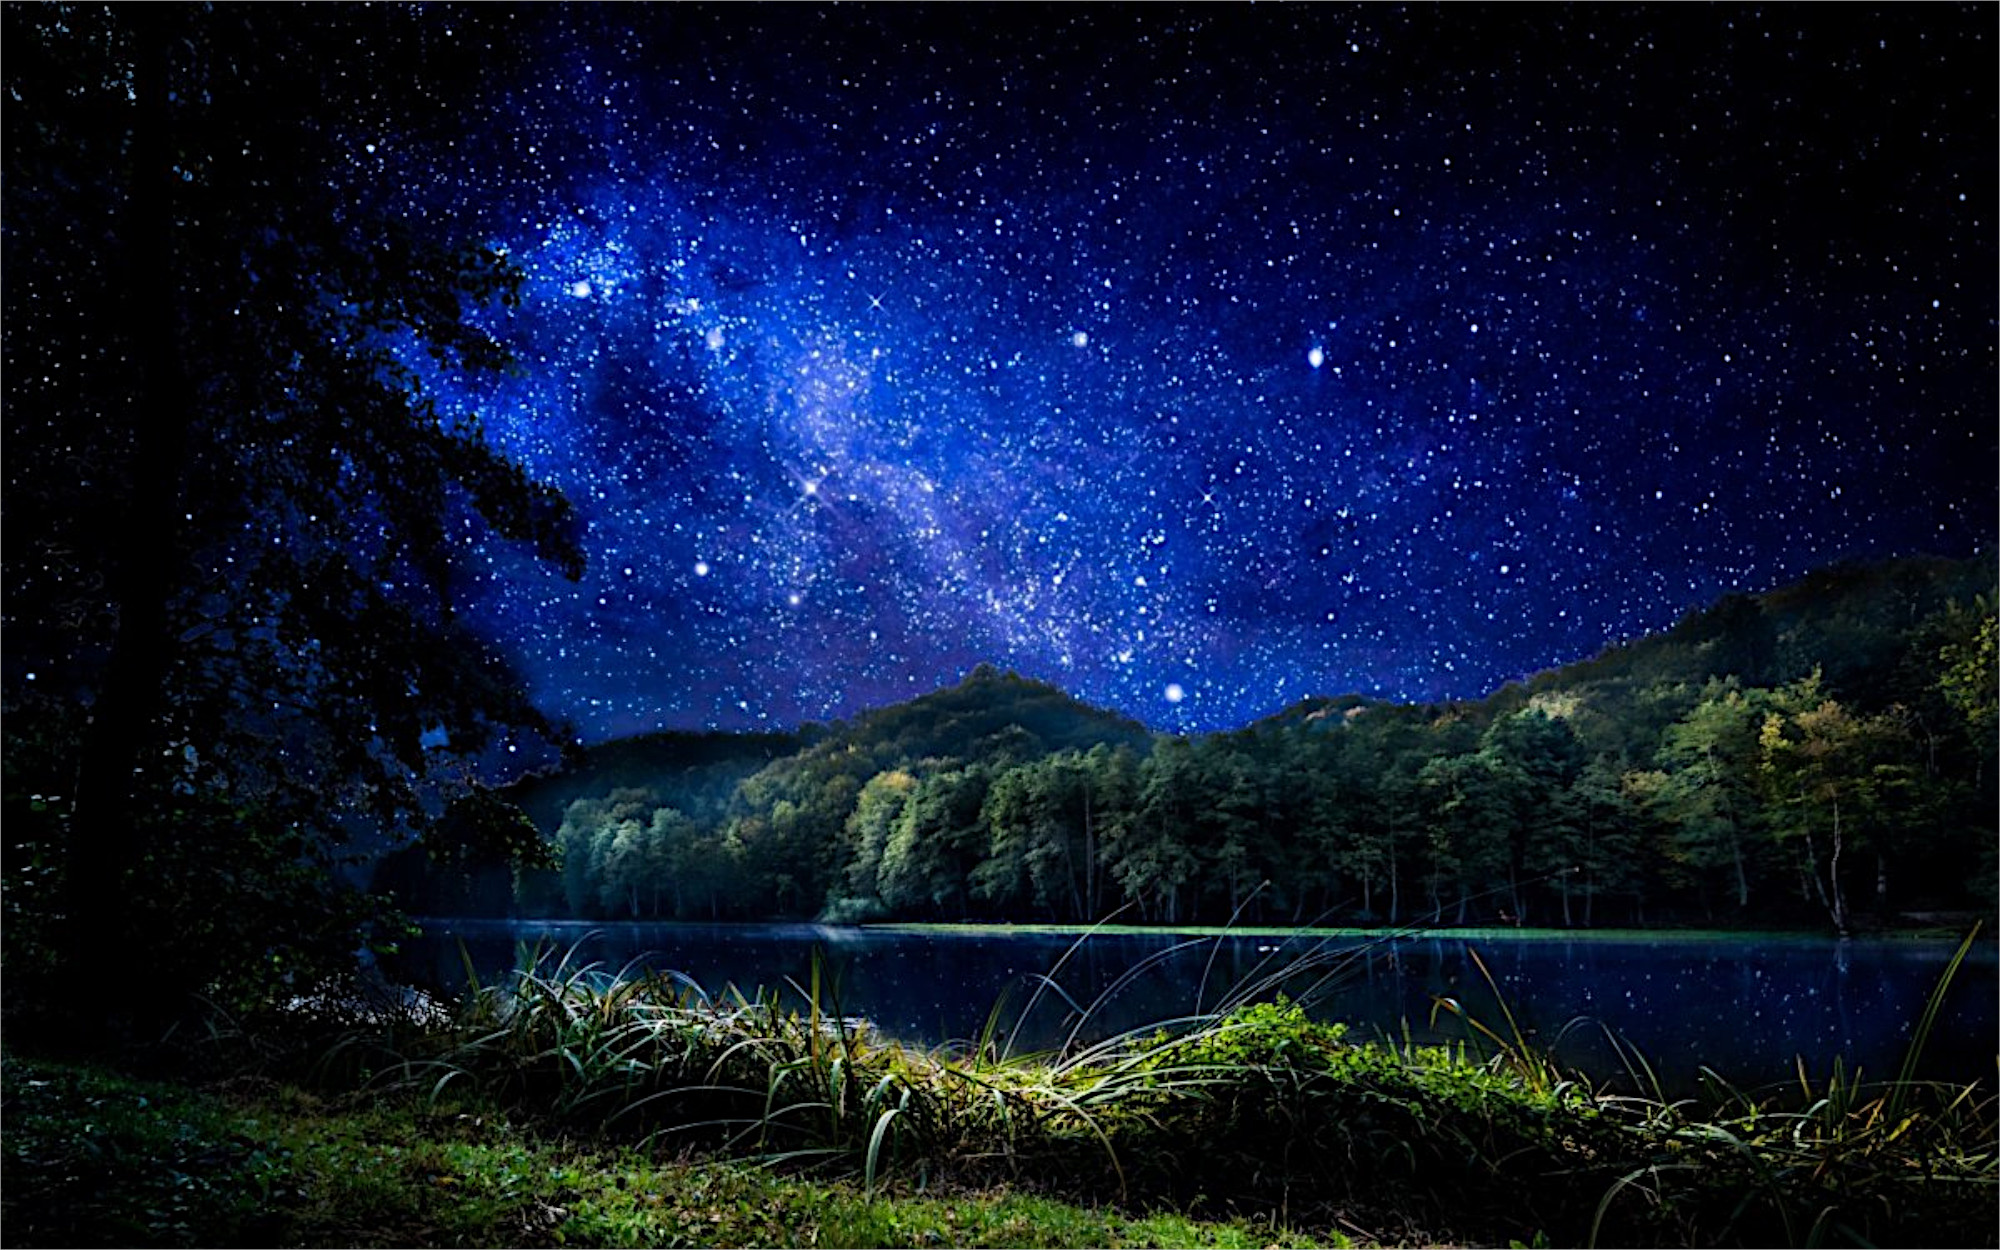 The starry sky over the forest river